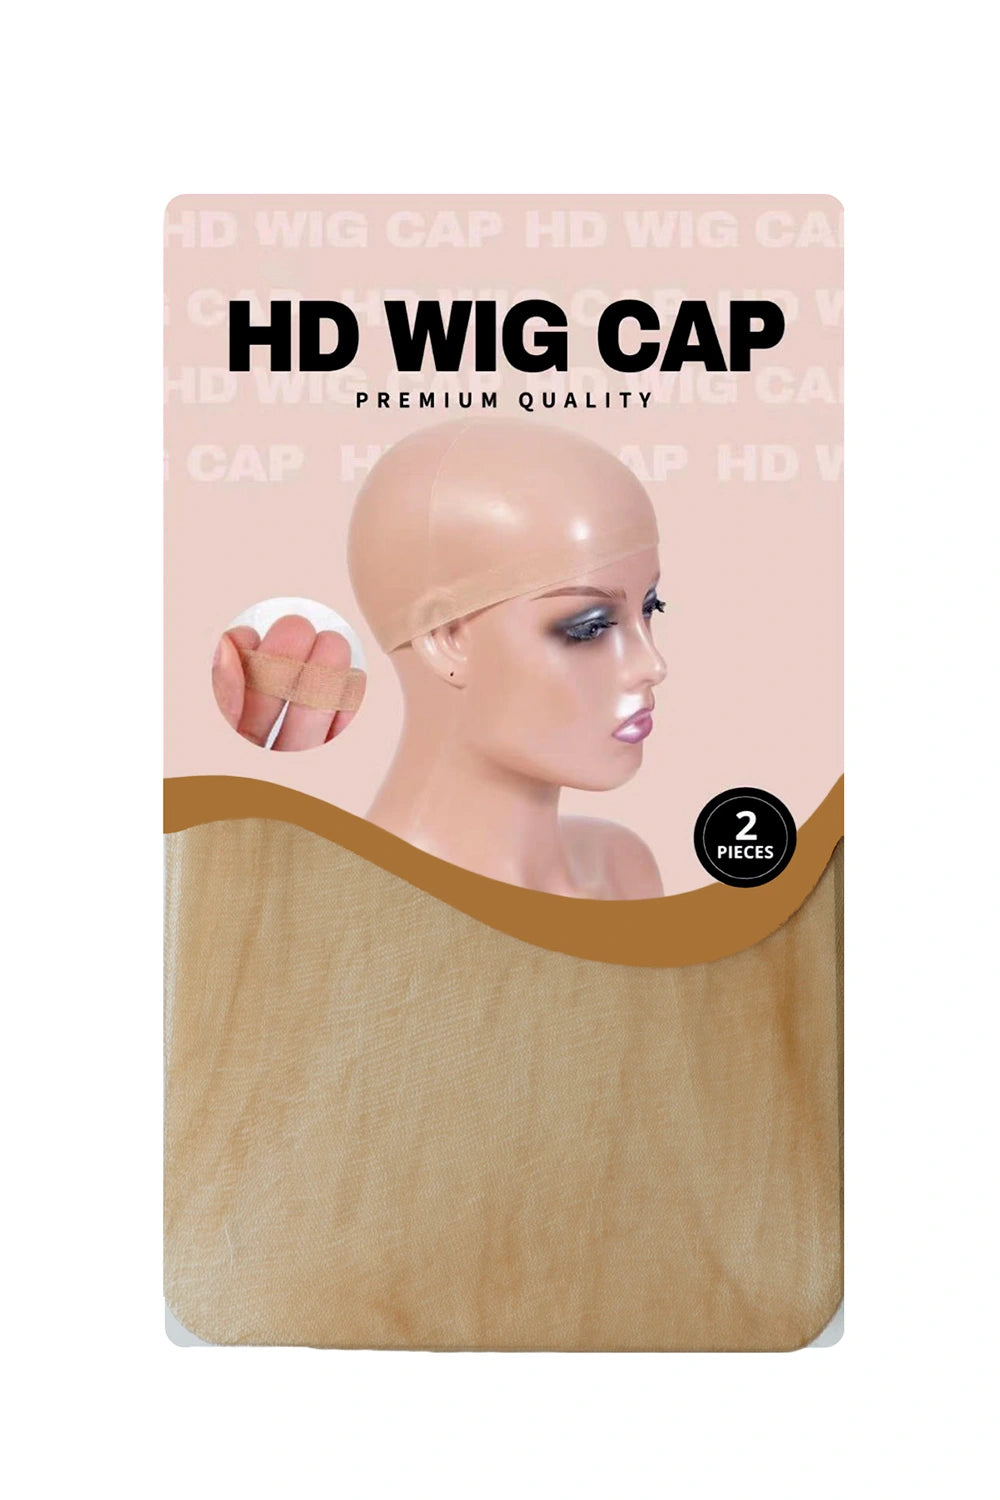 HD Wig Cap front package image